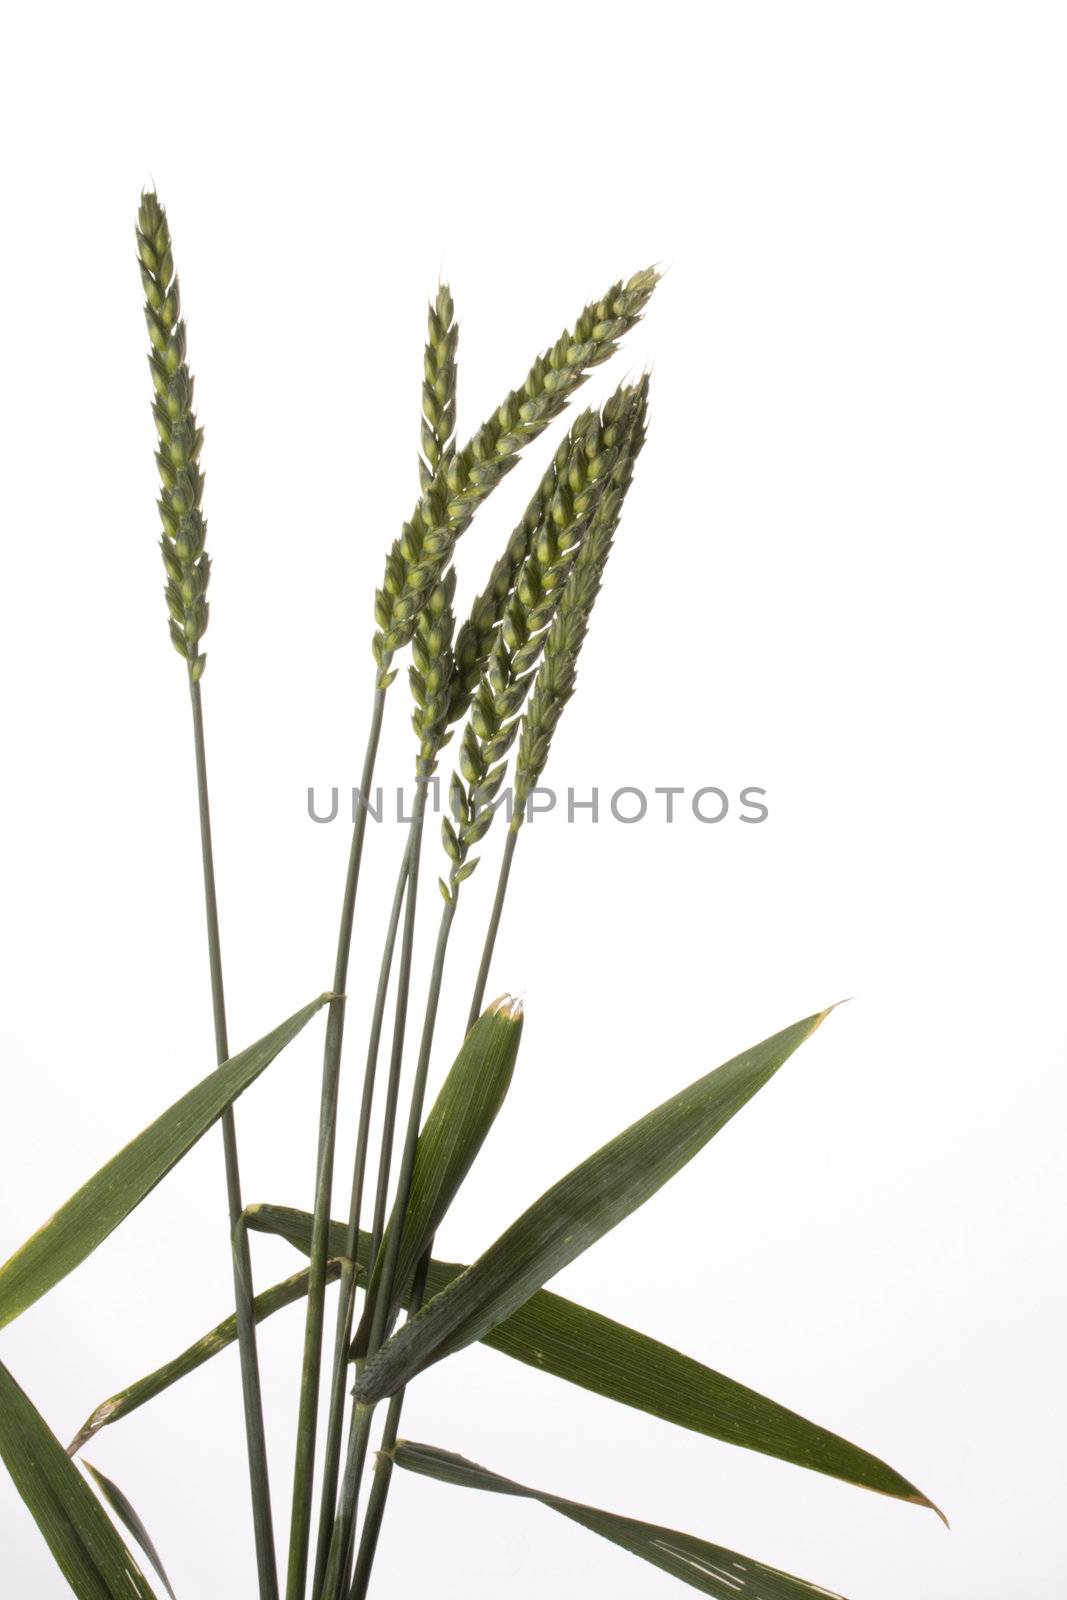 single wheat plants on a white background by bernjuer